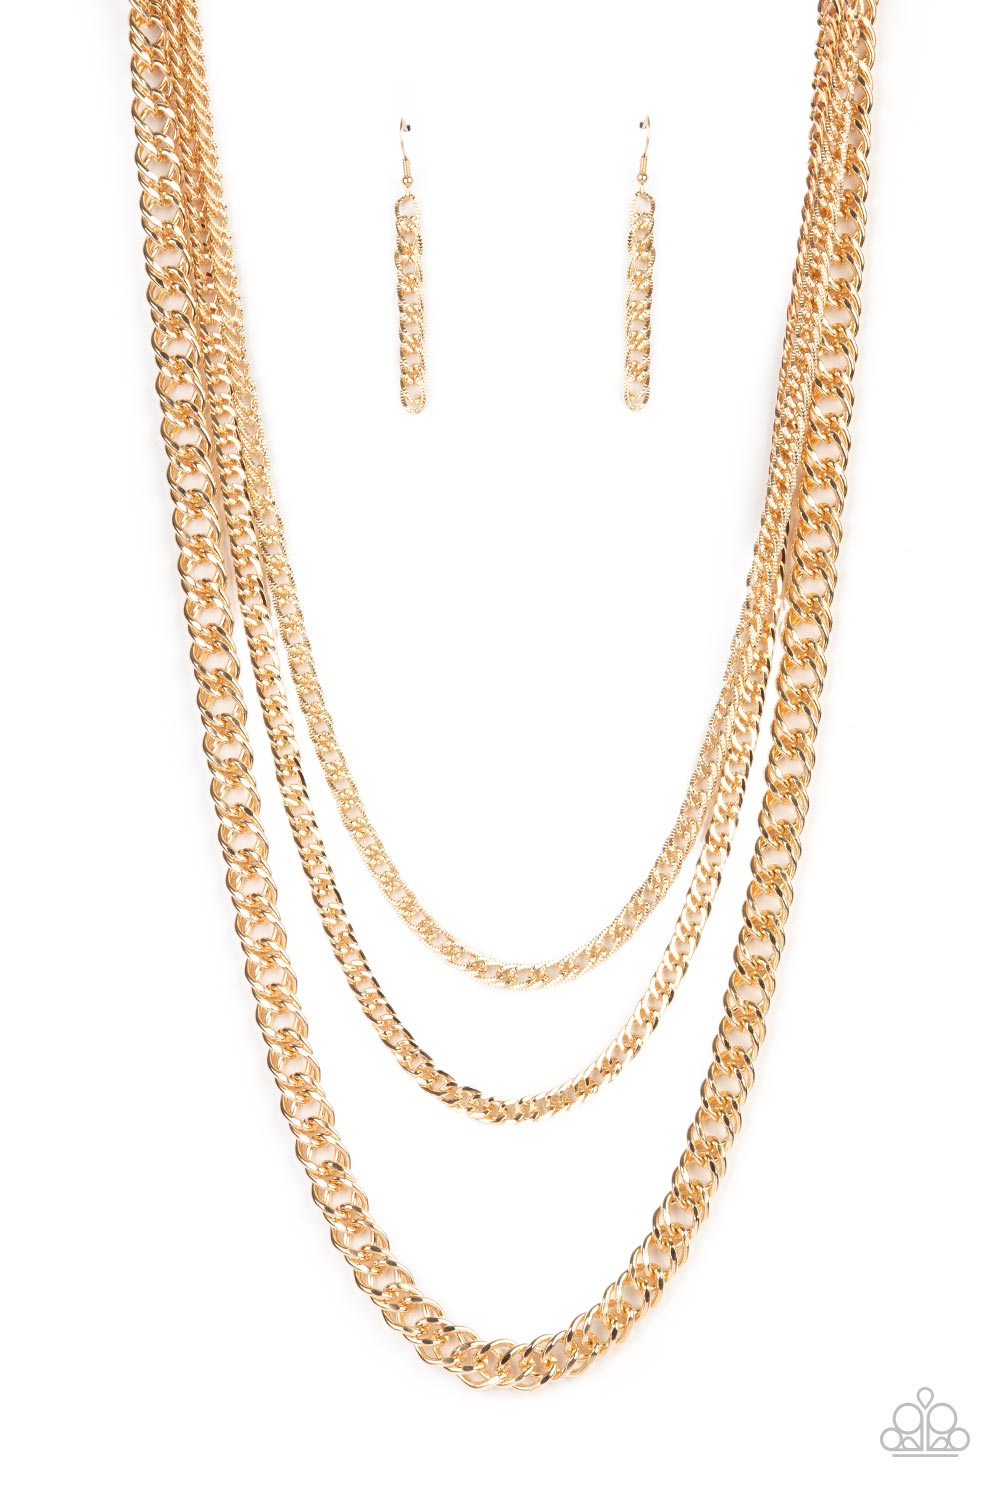 Chain of Champions Gold Necklace - Paparazzi Accessories  Bold layers of glistening gold chain of varying sizes and textures, fall like a weighty medal across the chest creating a shimmering industrial effect. Features an adjustable clasp closure.  All Paparazzi Accessories are lead free and nickel free!  Sold as one individual necklace. Includes one pair of matching earrings.